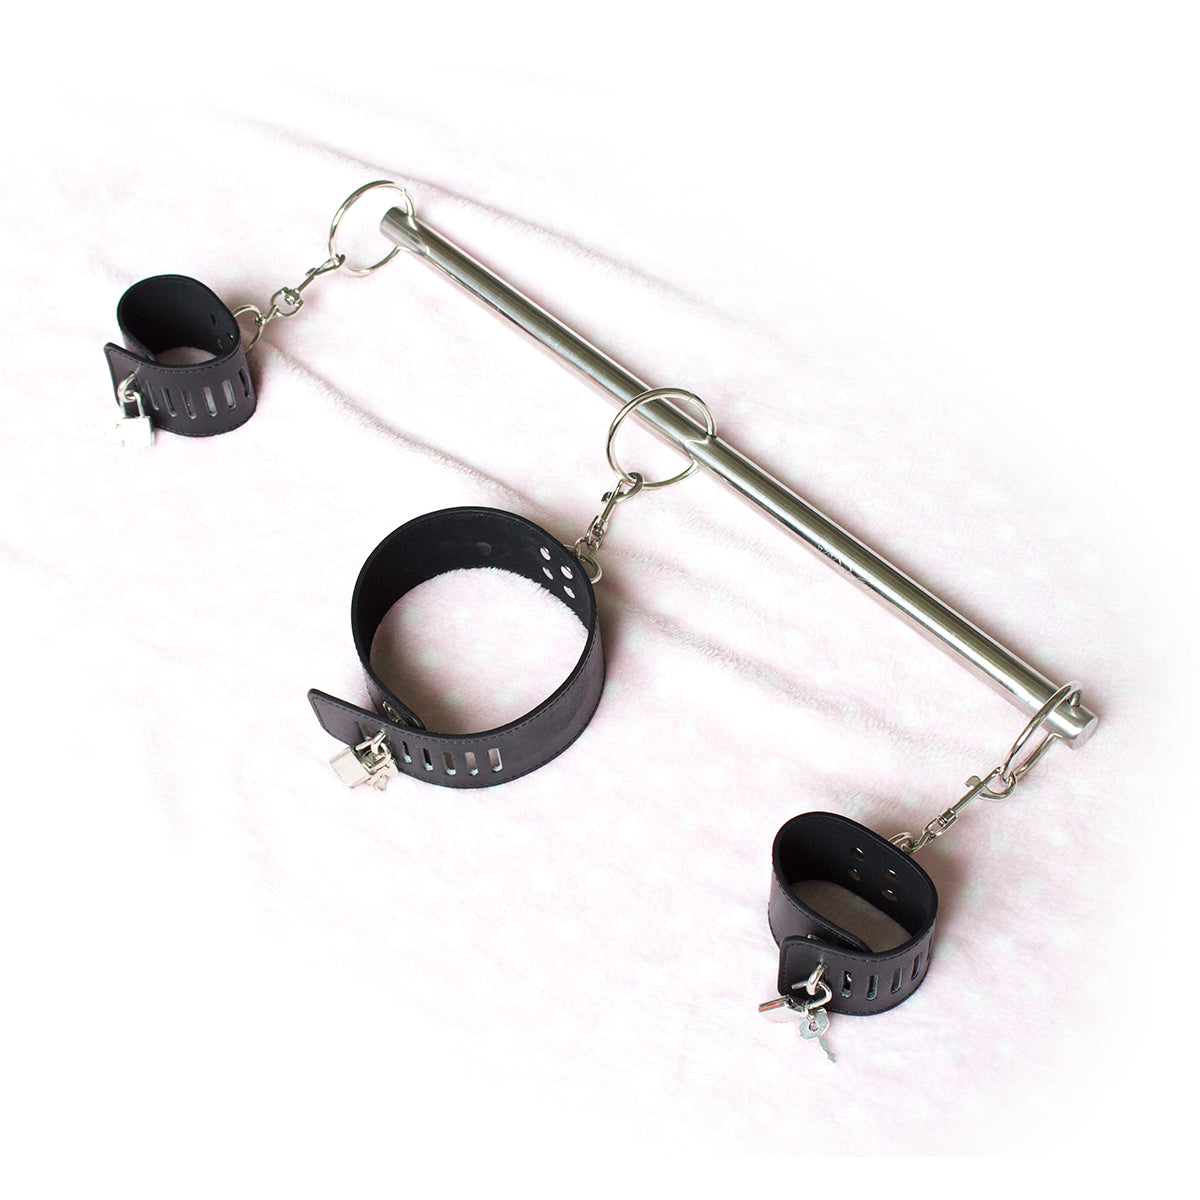 Undetachable Steel Spreader Bar with Collar and Handcuffs - Bondage Spreader Bar with Lock Leather Restraints Wrist Cuff and Collar for BDSM Dominatrix Kinky Fetish